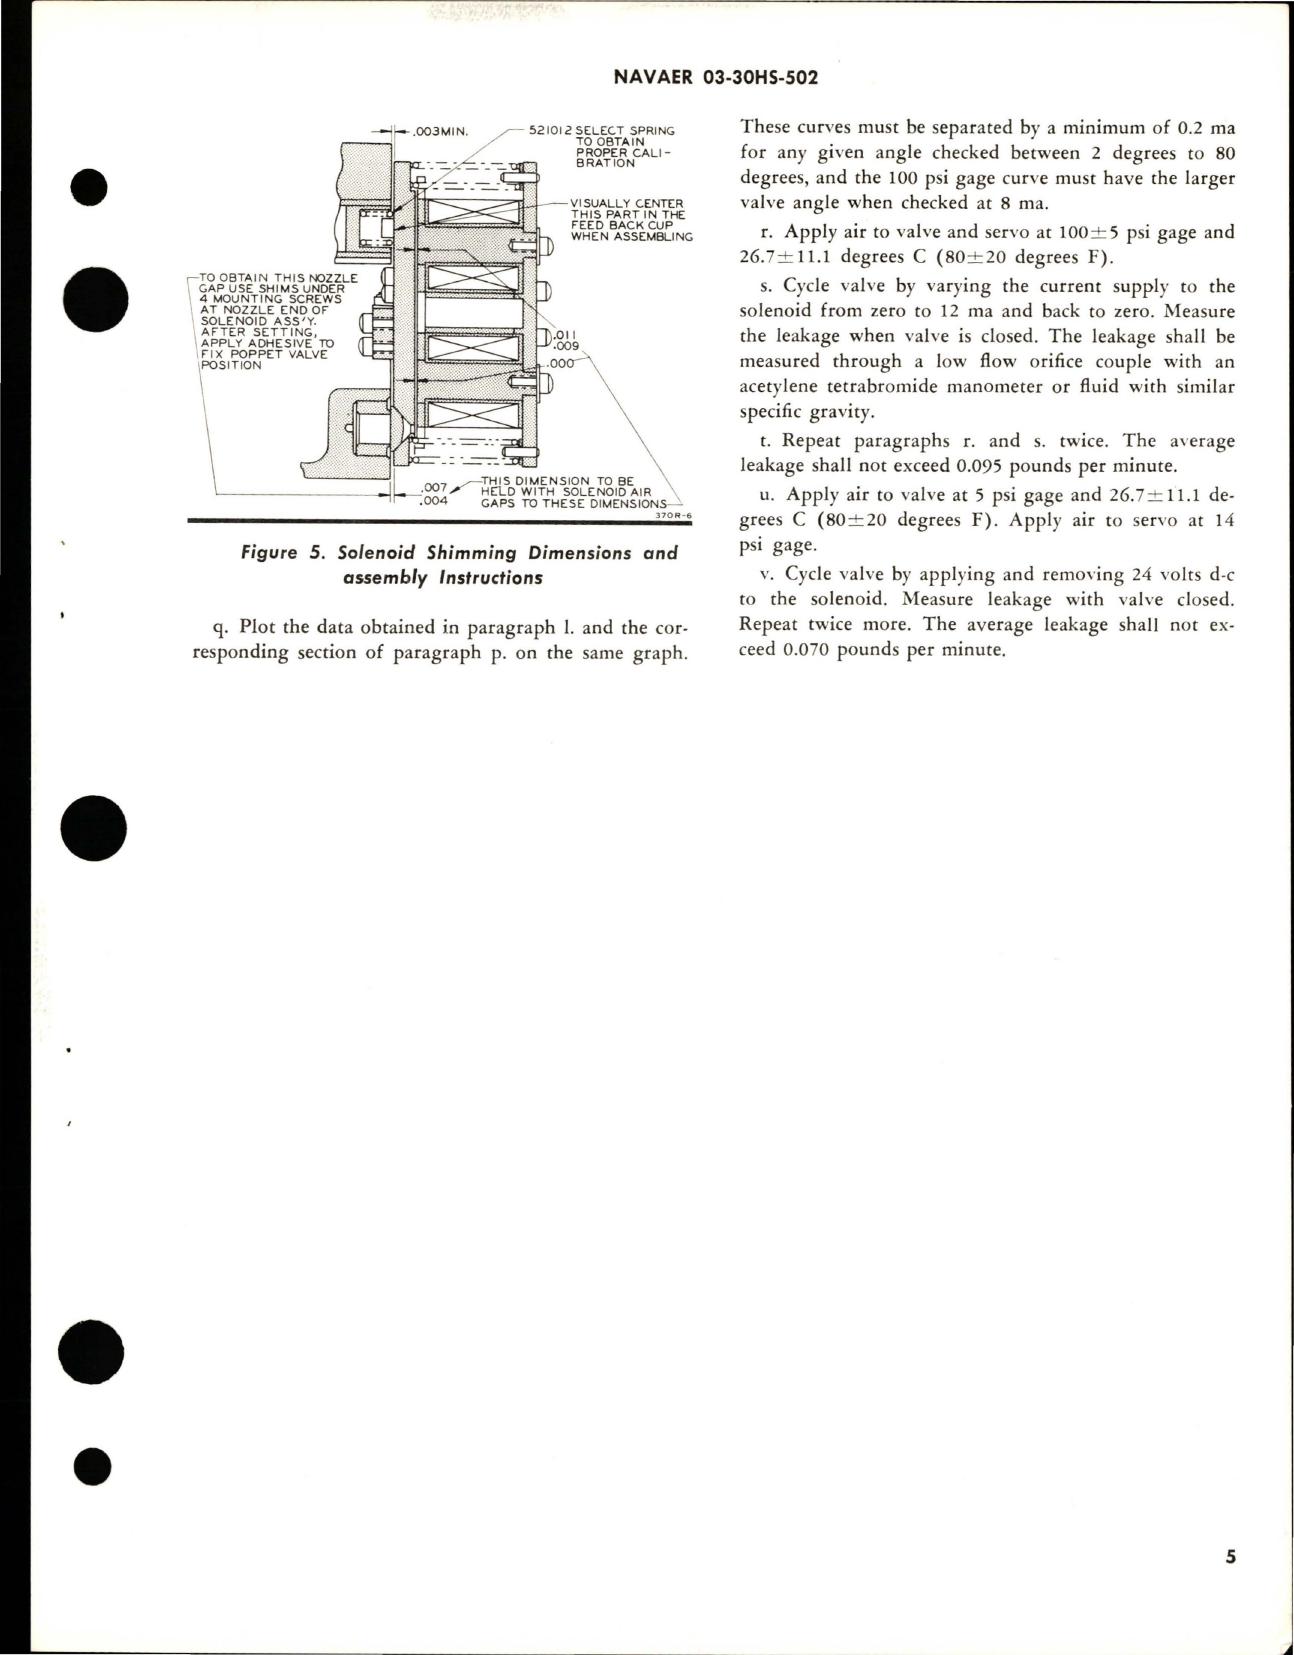 Sample page 5 from AirCorps Library document: Overhaul Instructions with Parts Breakdown for Air Control Valve and Actuator Assembly - 515985